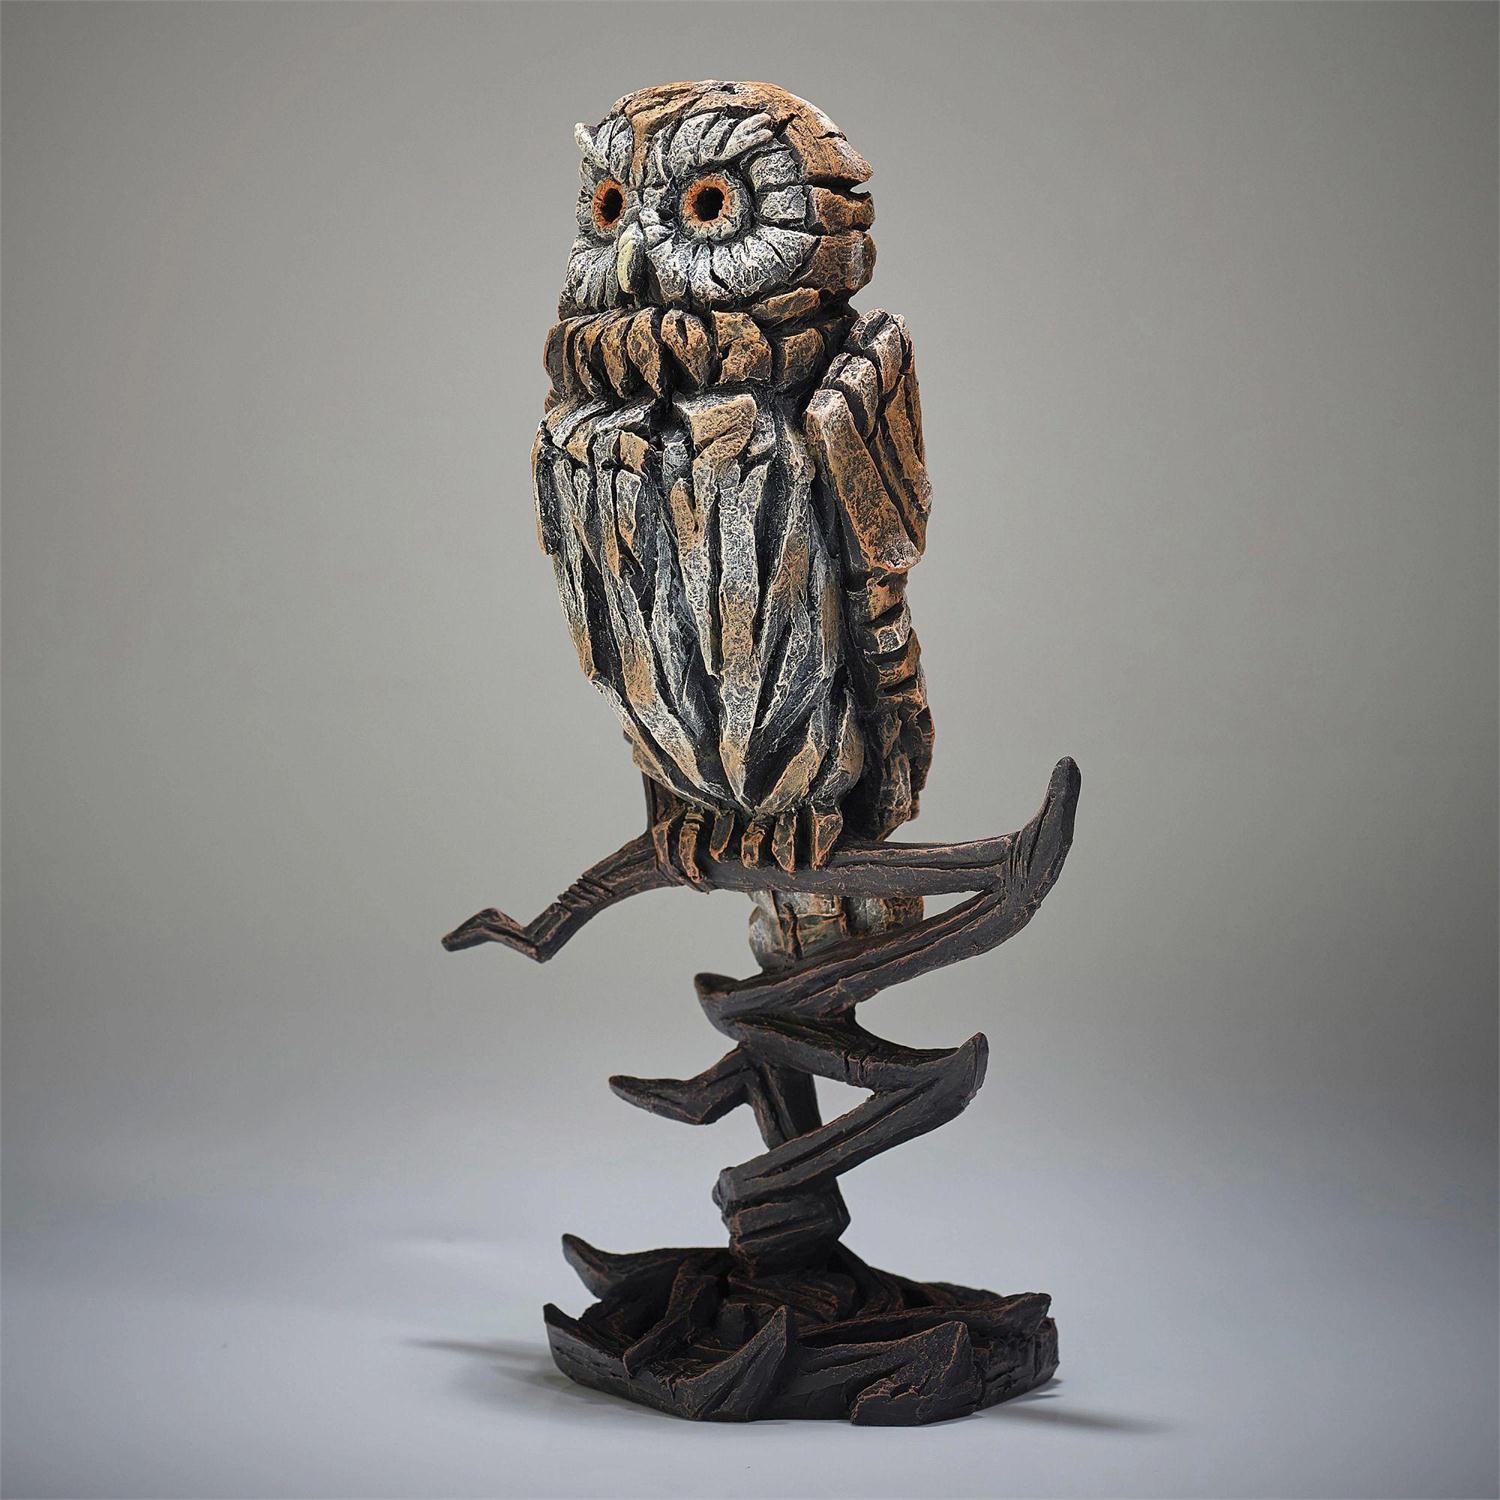 Pre Order Enesco Gifts Artist Matt Buckley The Edge Sculpture Owl Sculpture Free Shipping Iveys Gifts And Decor